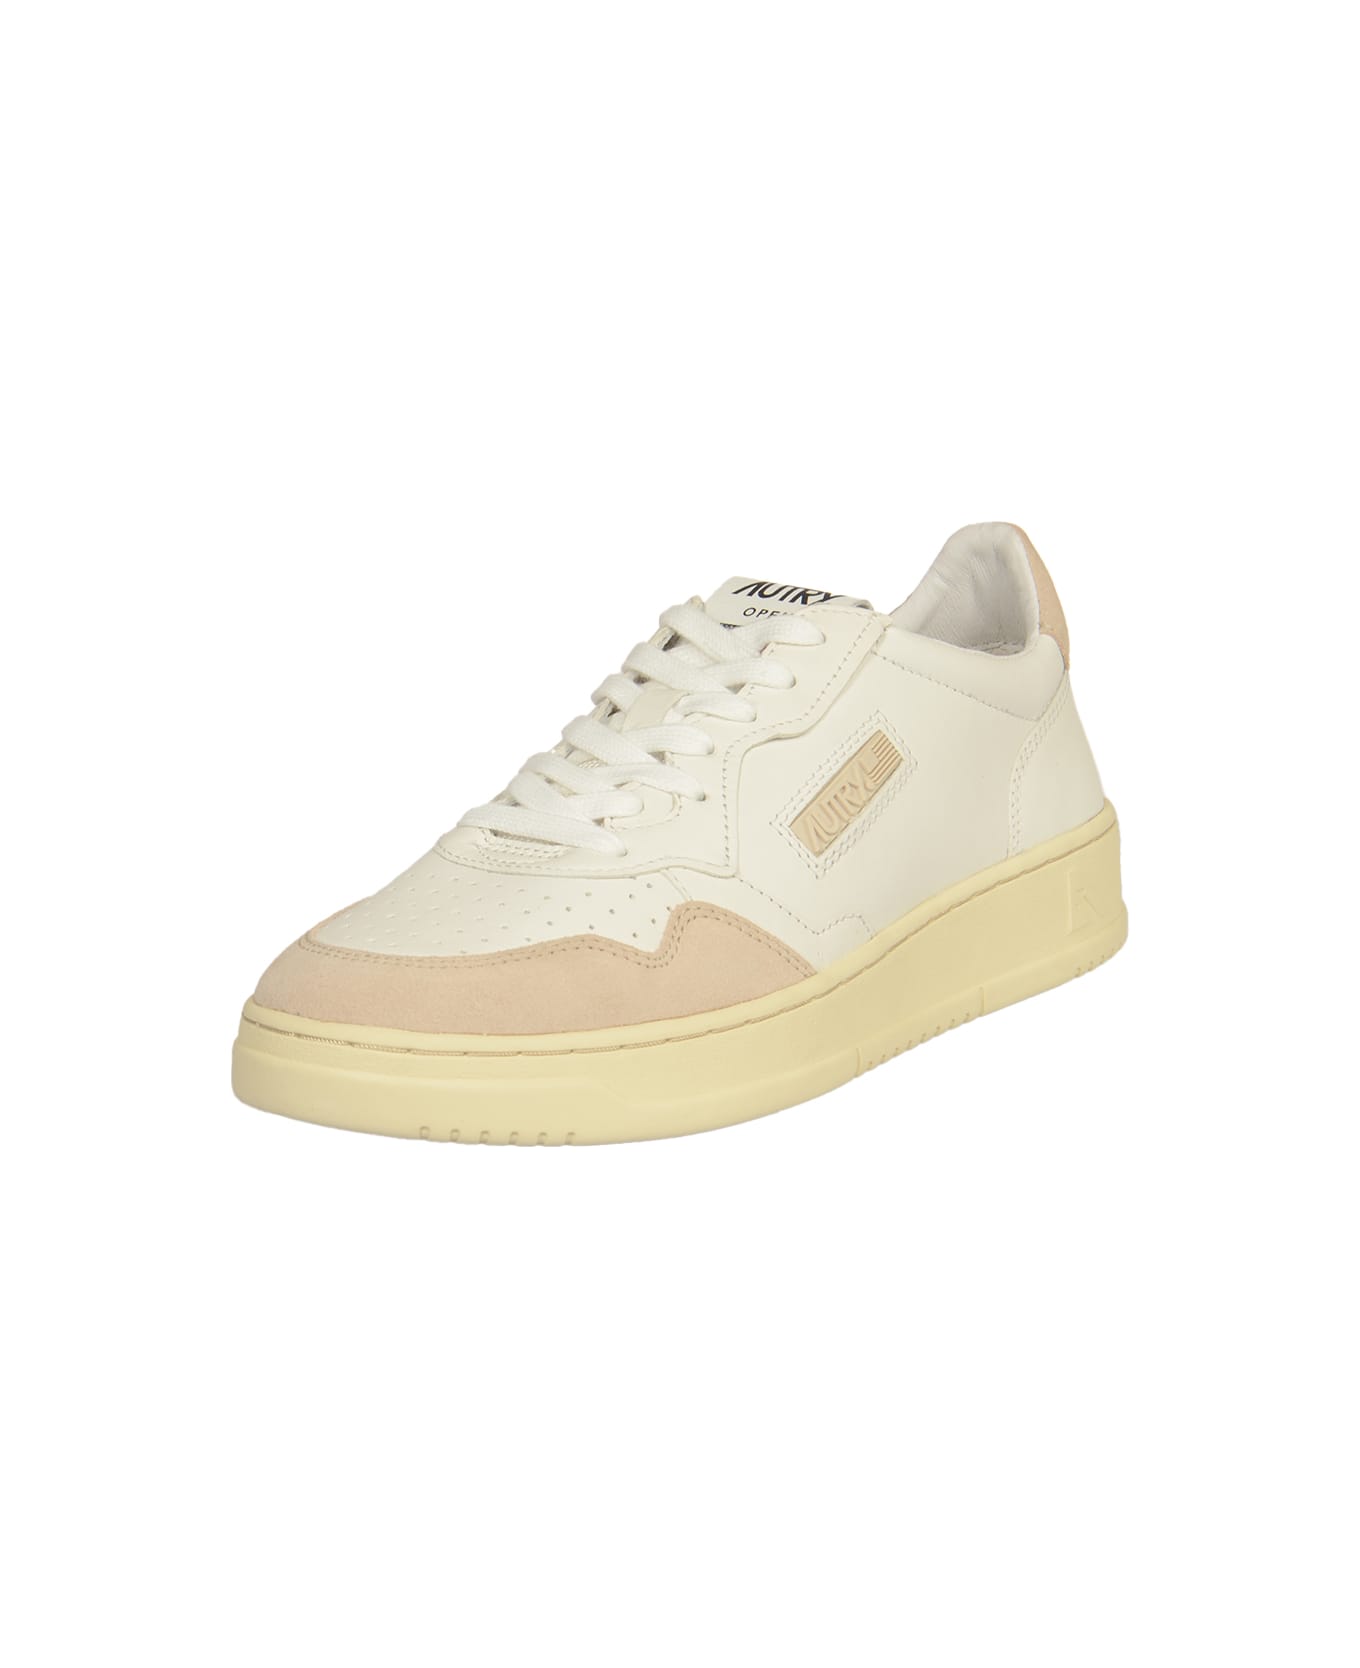 Autry Medalist Low Sneakers - White/Sand